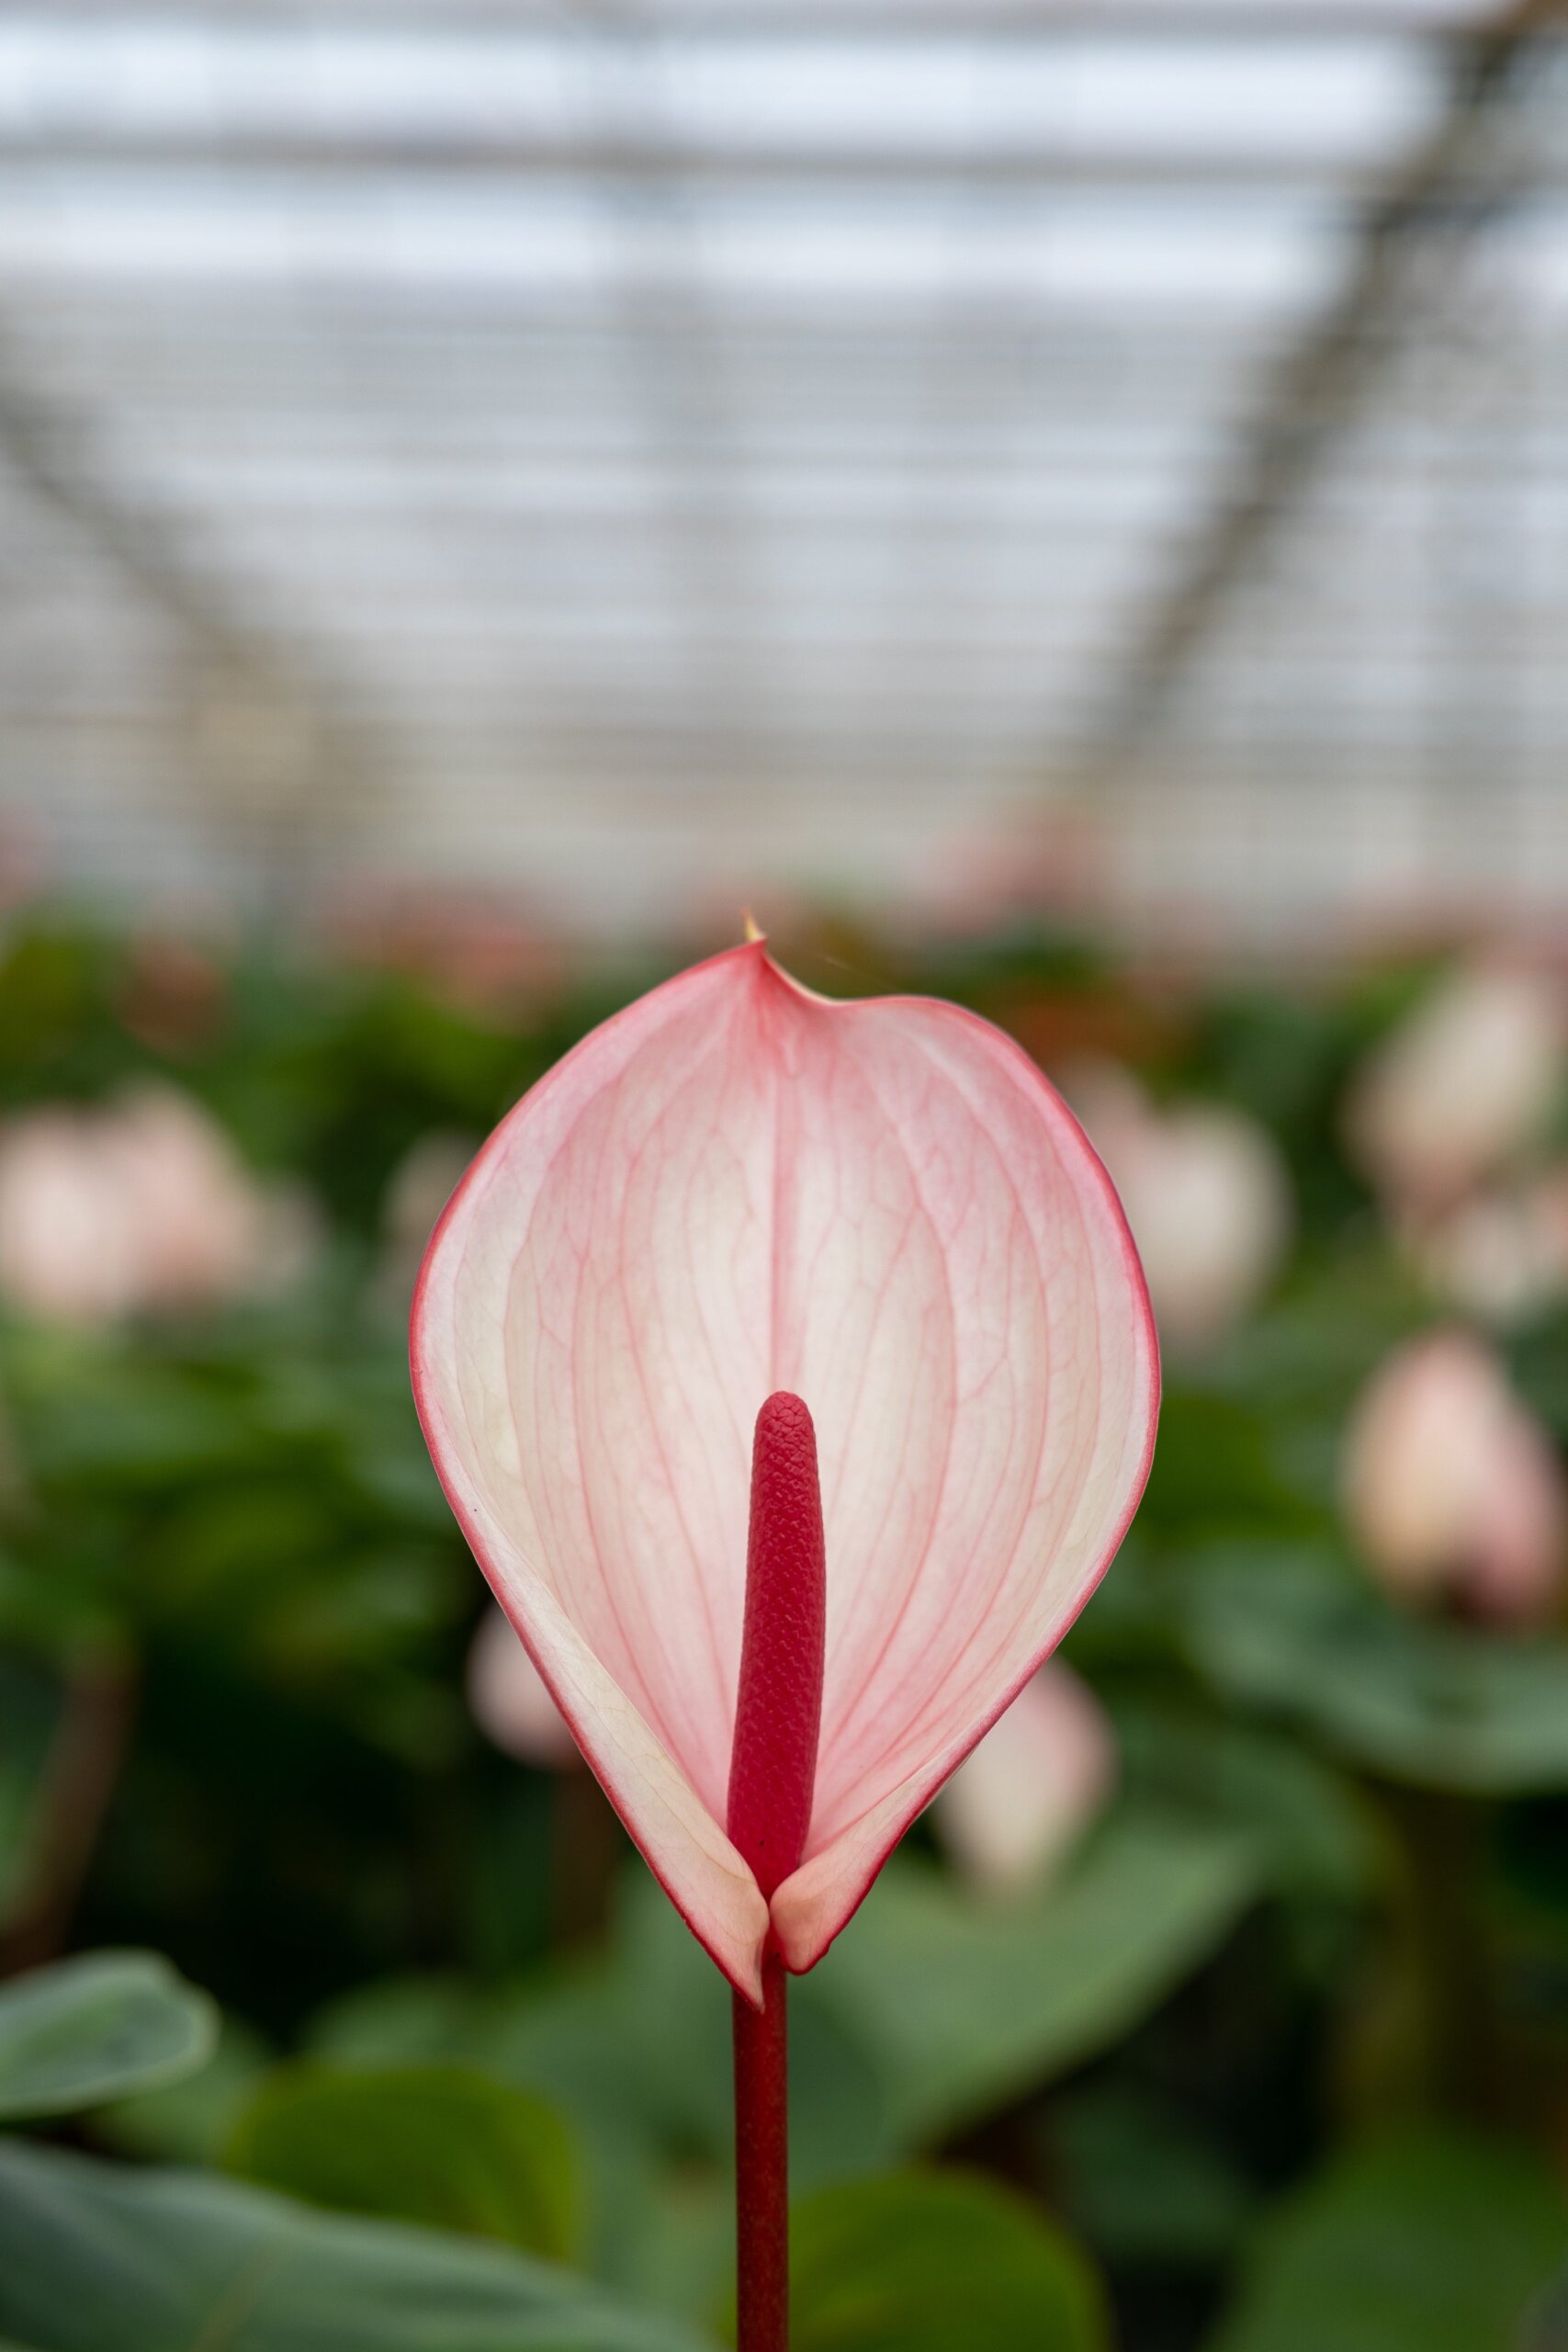 The Journey of the Anthurium